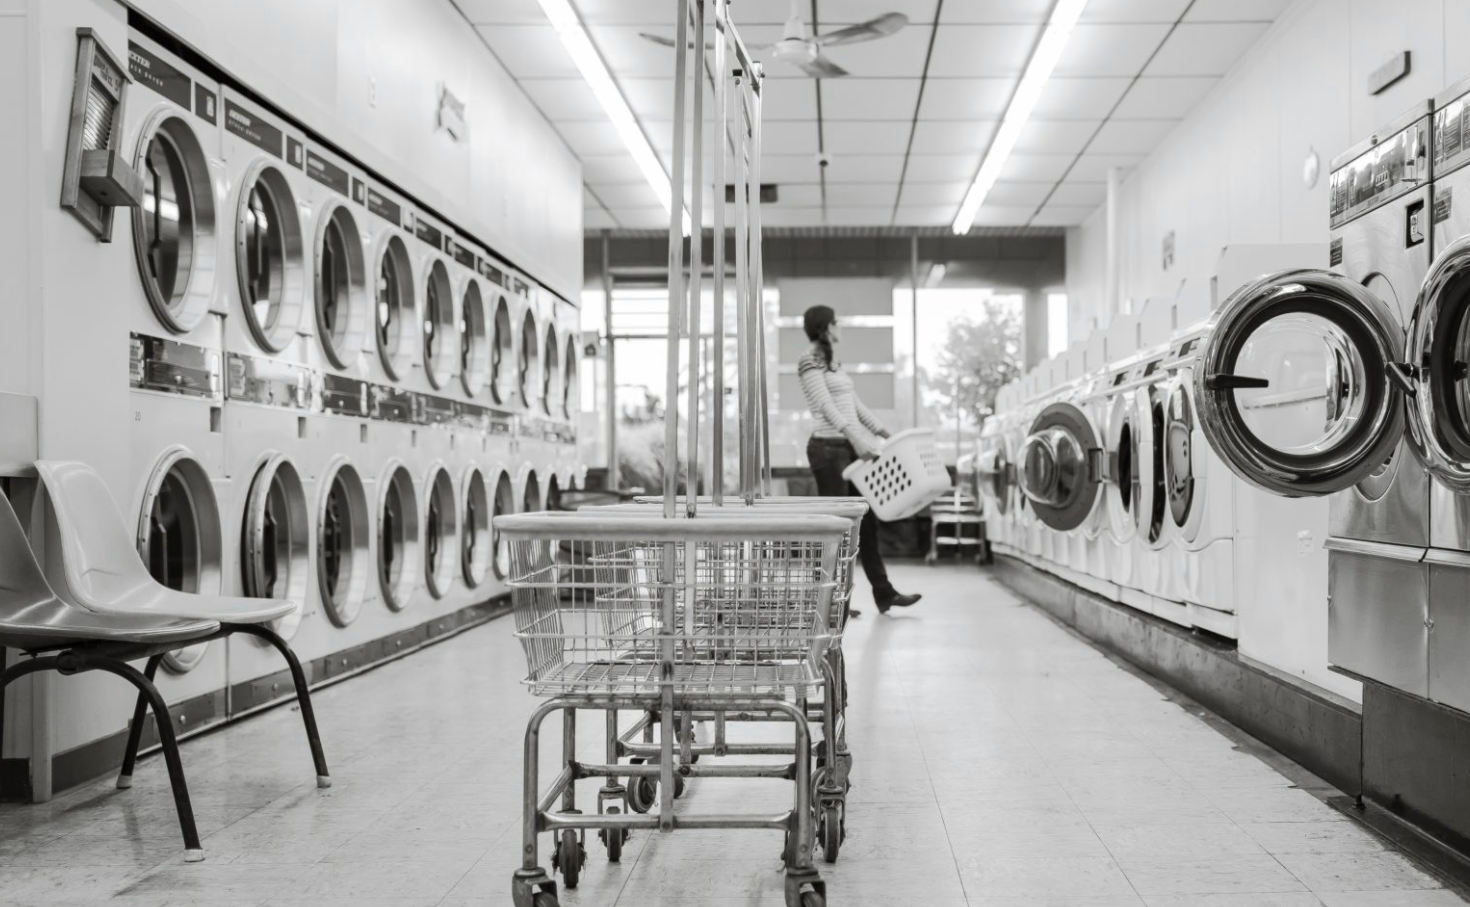 How Much Money Does a Laundromat Make